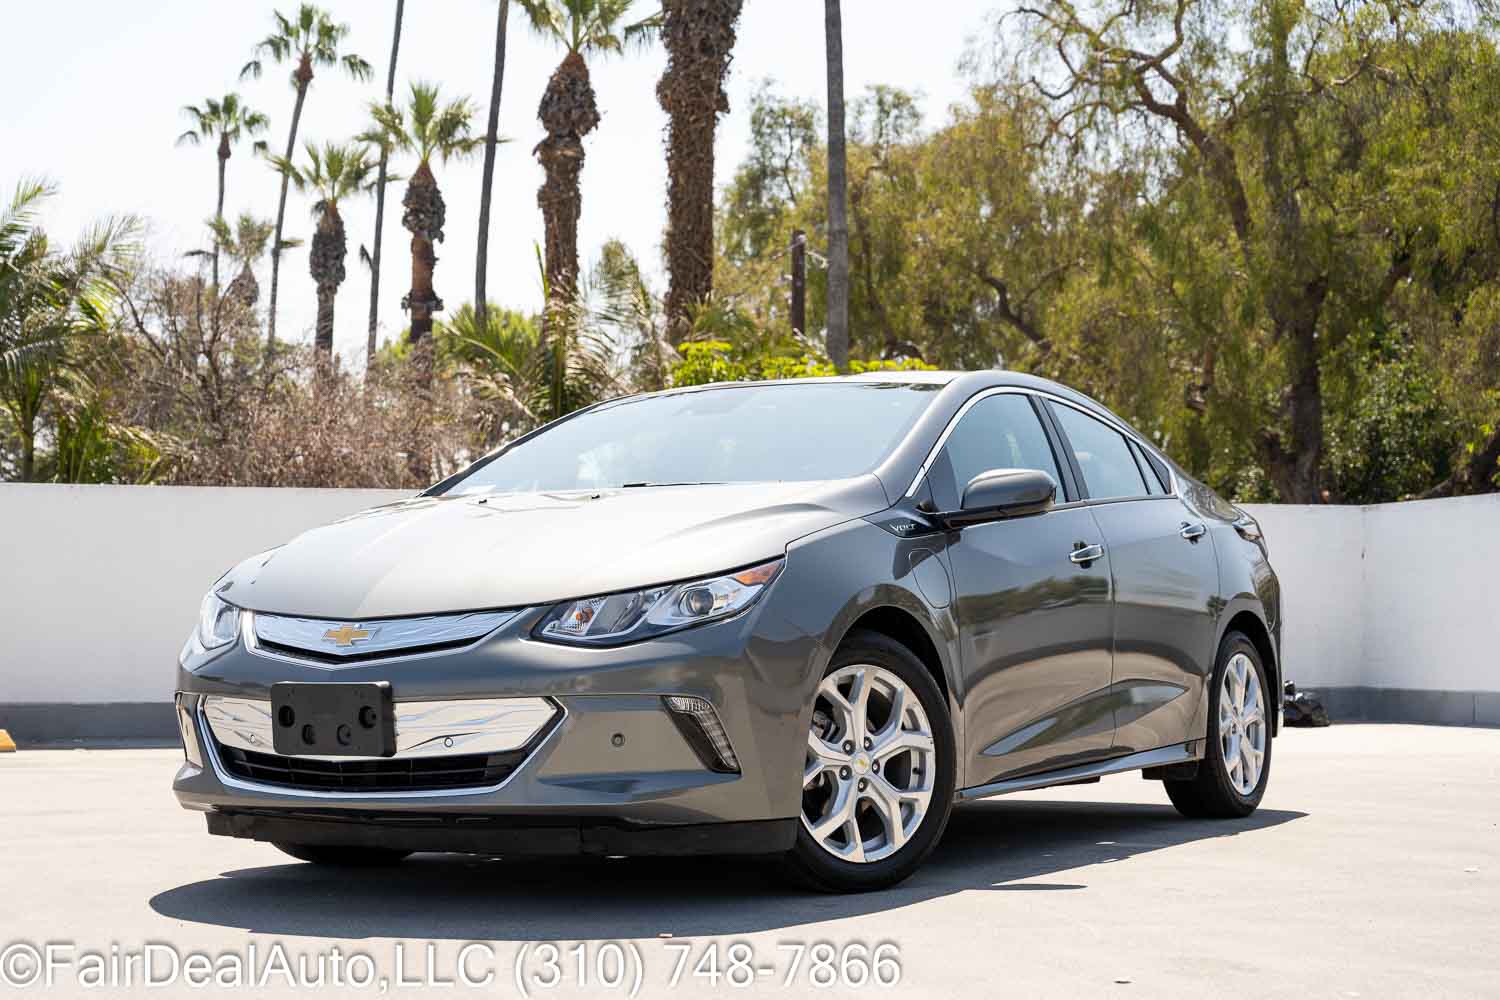 short-term-lease-on-a-chevy-volt-lease-a-chevy-volt-in-los-angeles